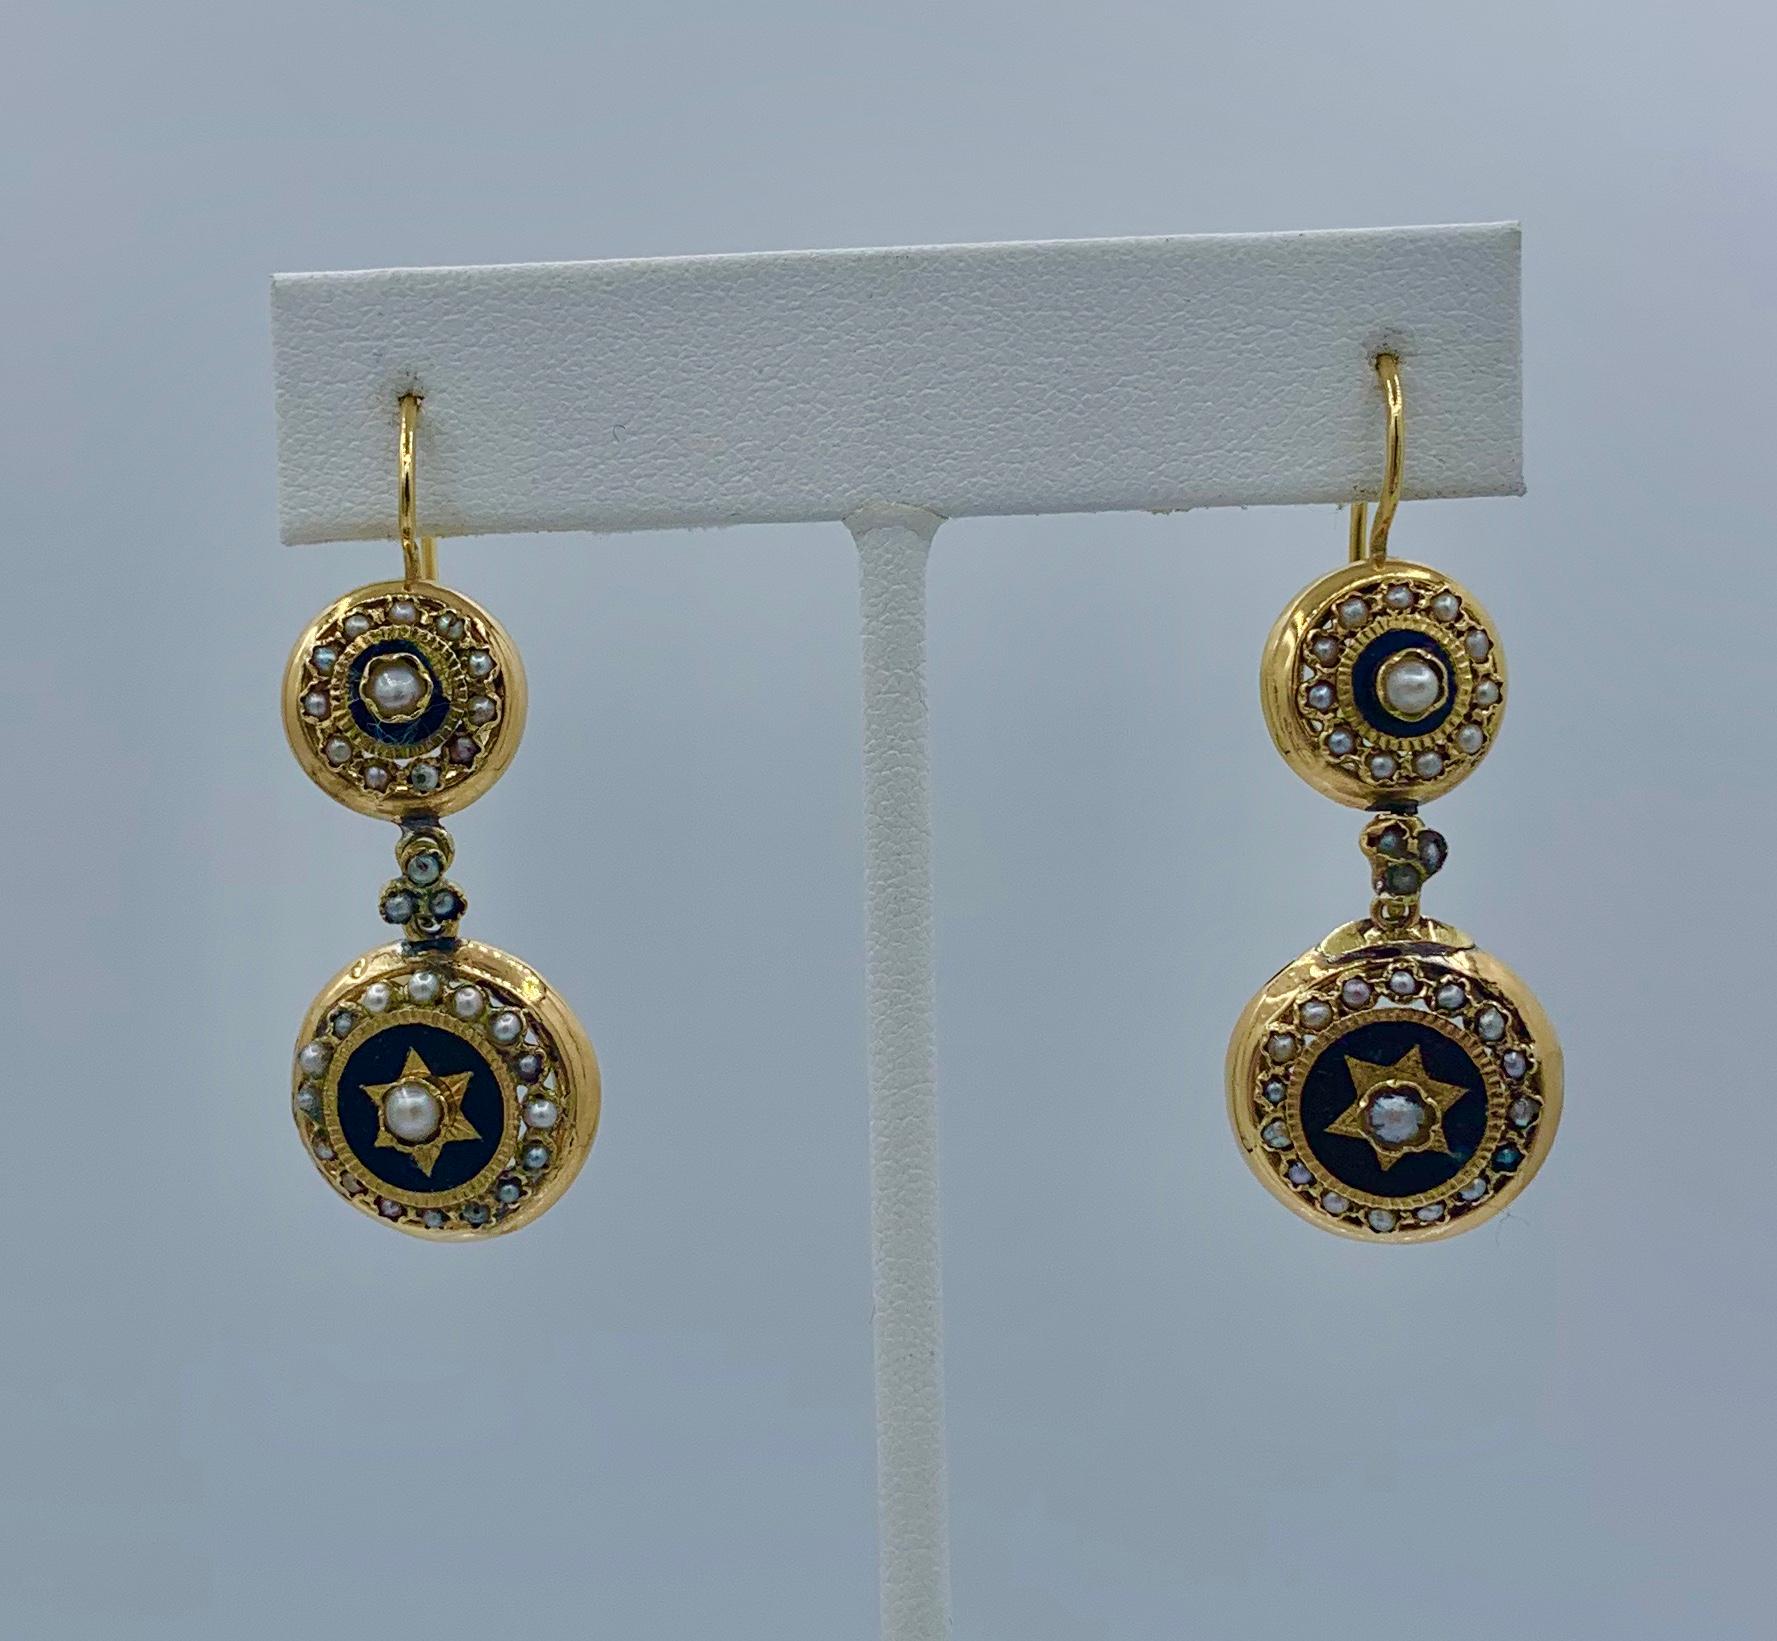 This is a very rare pair of early Antique French Georgian - Victorian Dangle Drop Earrings in 18 Karat Gold with a stunning star motif with enamel and pearls and a dramatic 1 7/8 inches long.   These antique earrings are of the highest quality. 